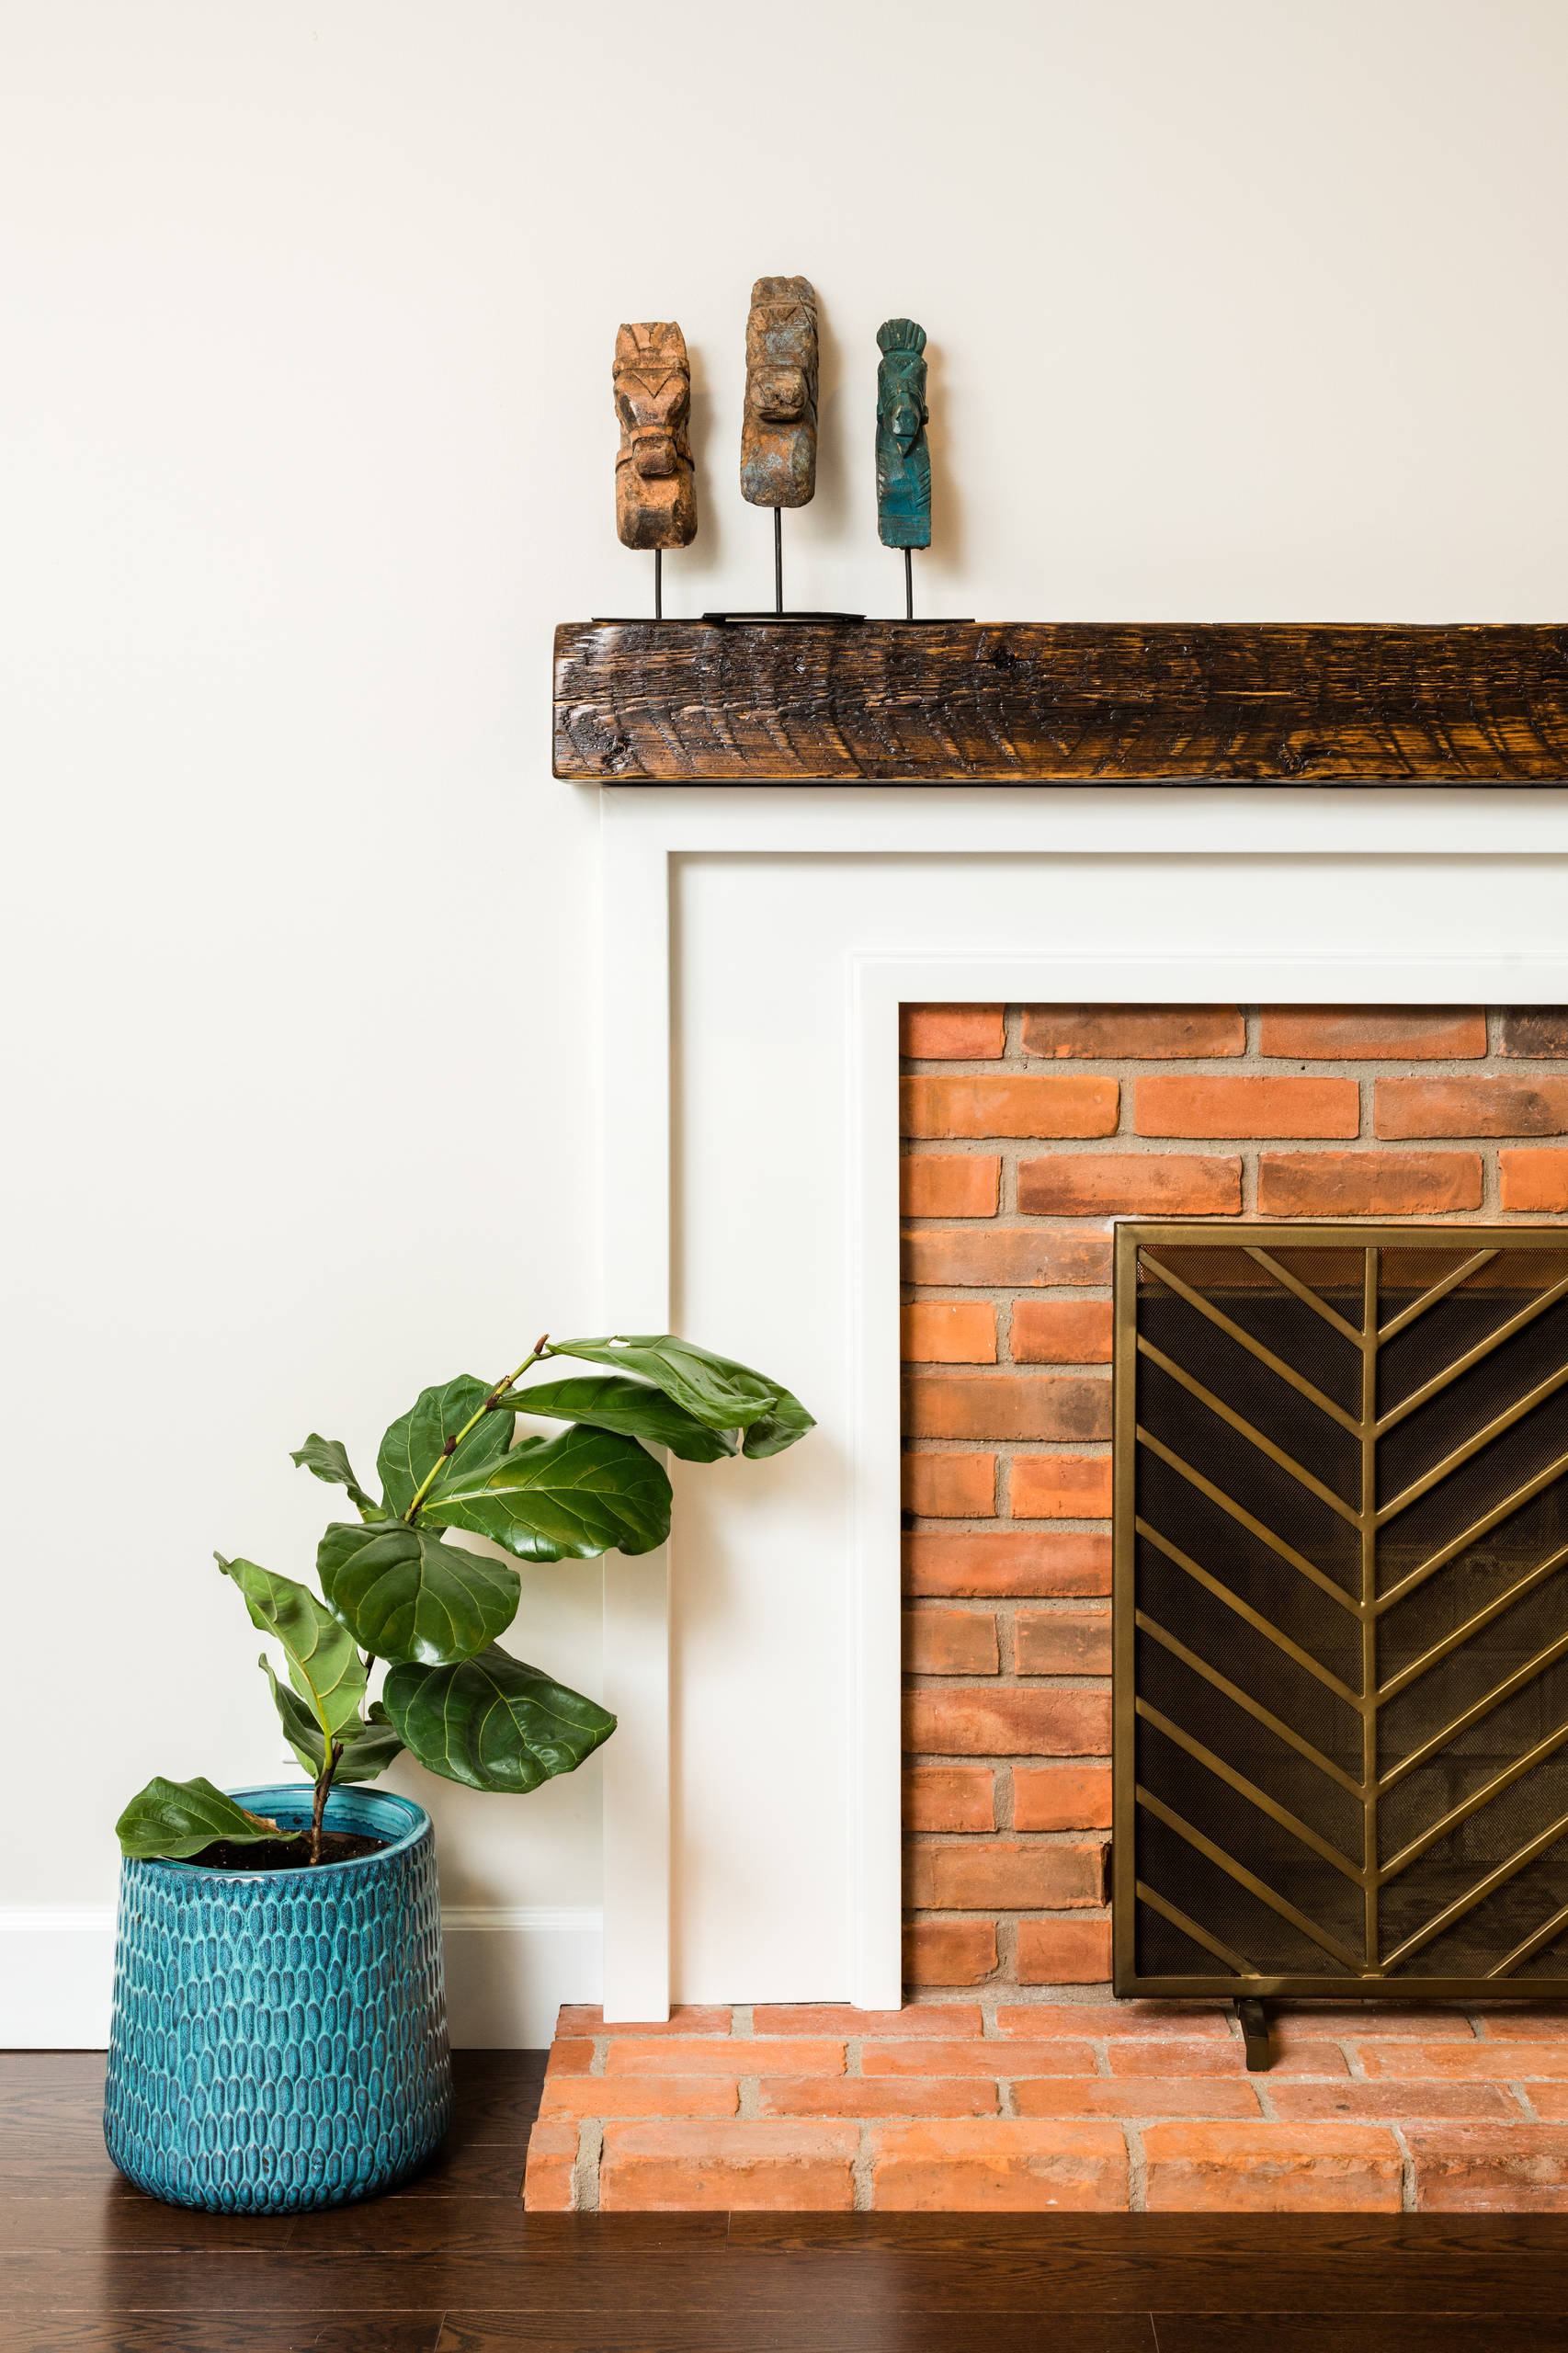 This mantle was created by a local woodsmith and artist with wood reclaimed from a Detroit Fire Station in Downtown Detroit Michigan. Each piece is numbered and registered, giving a little bit of love